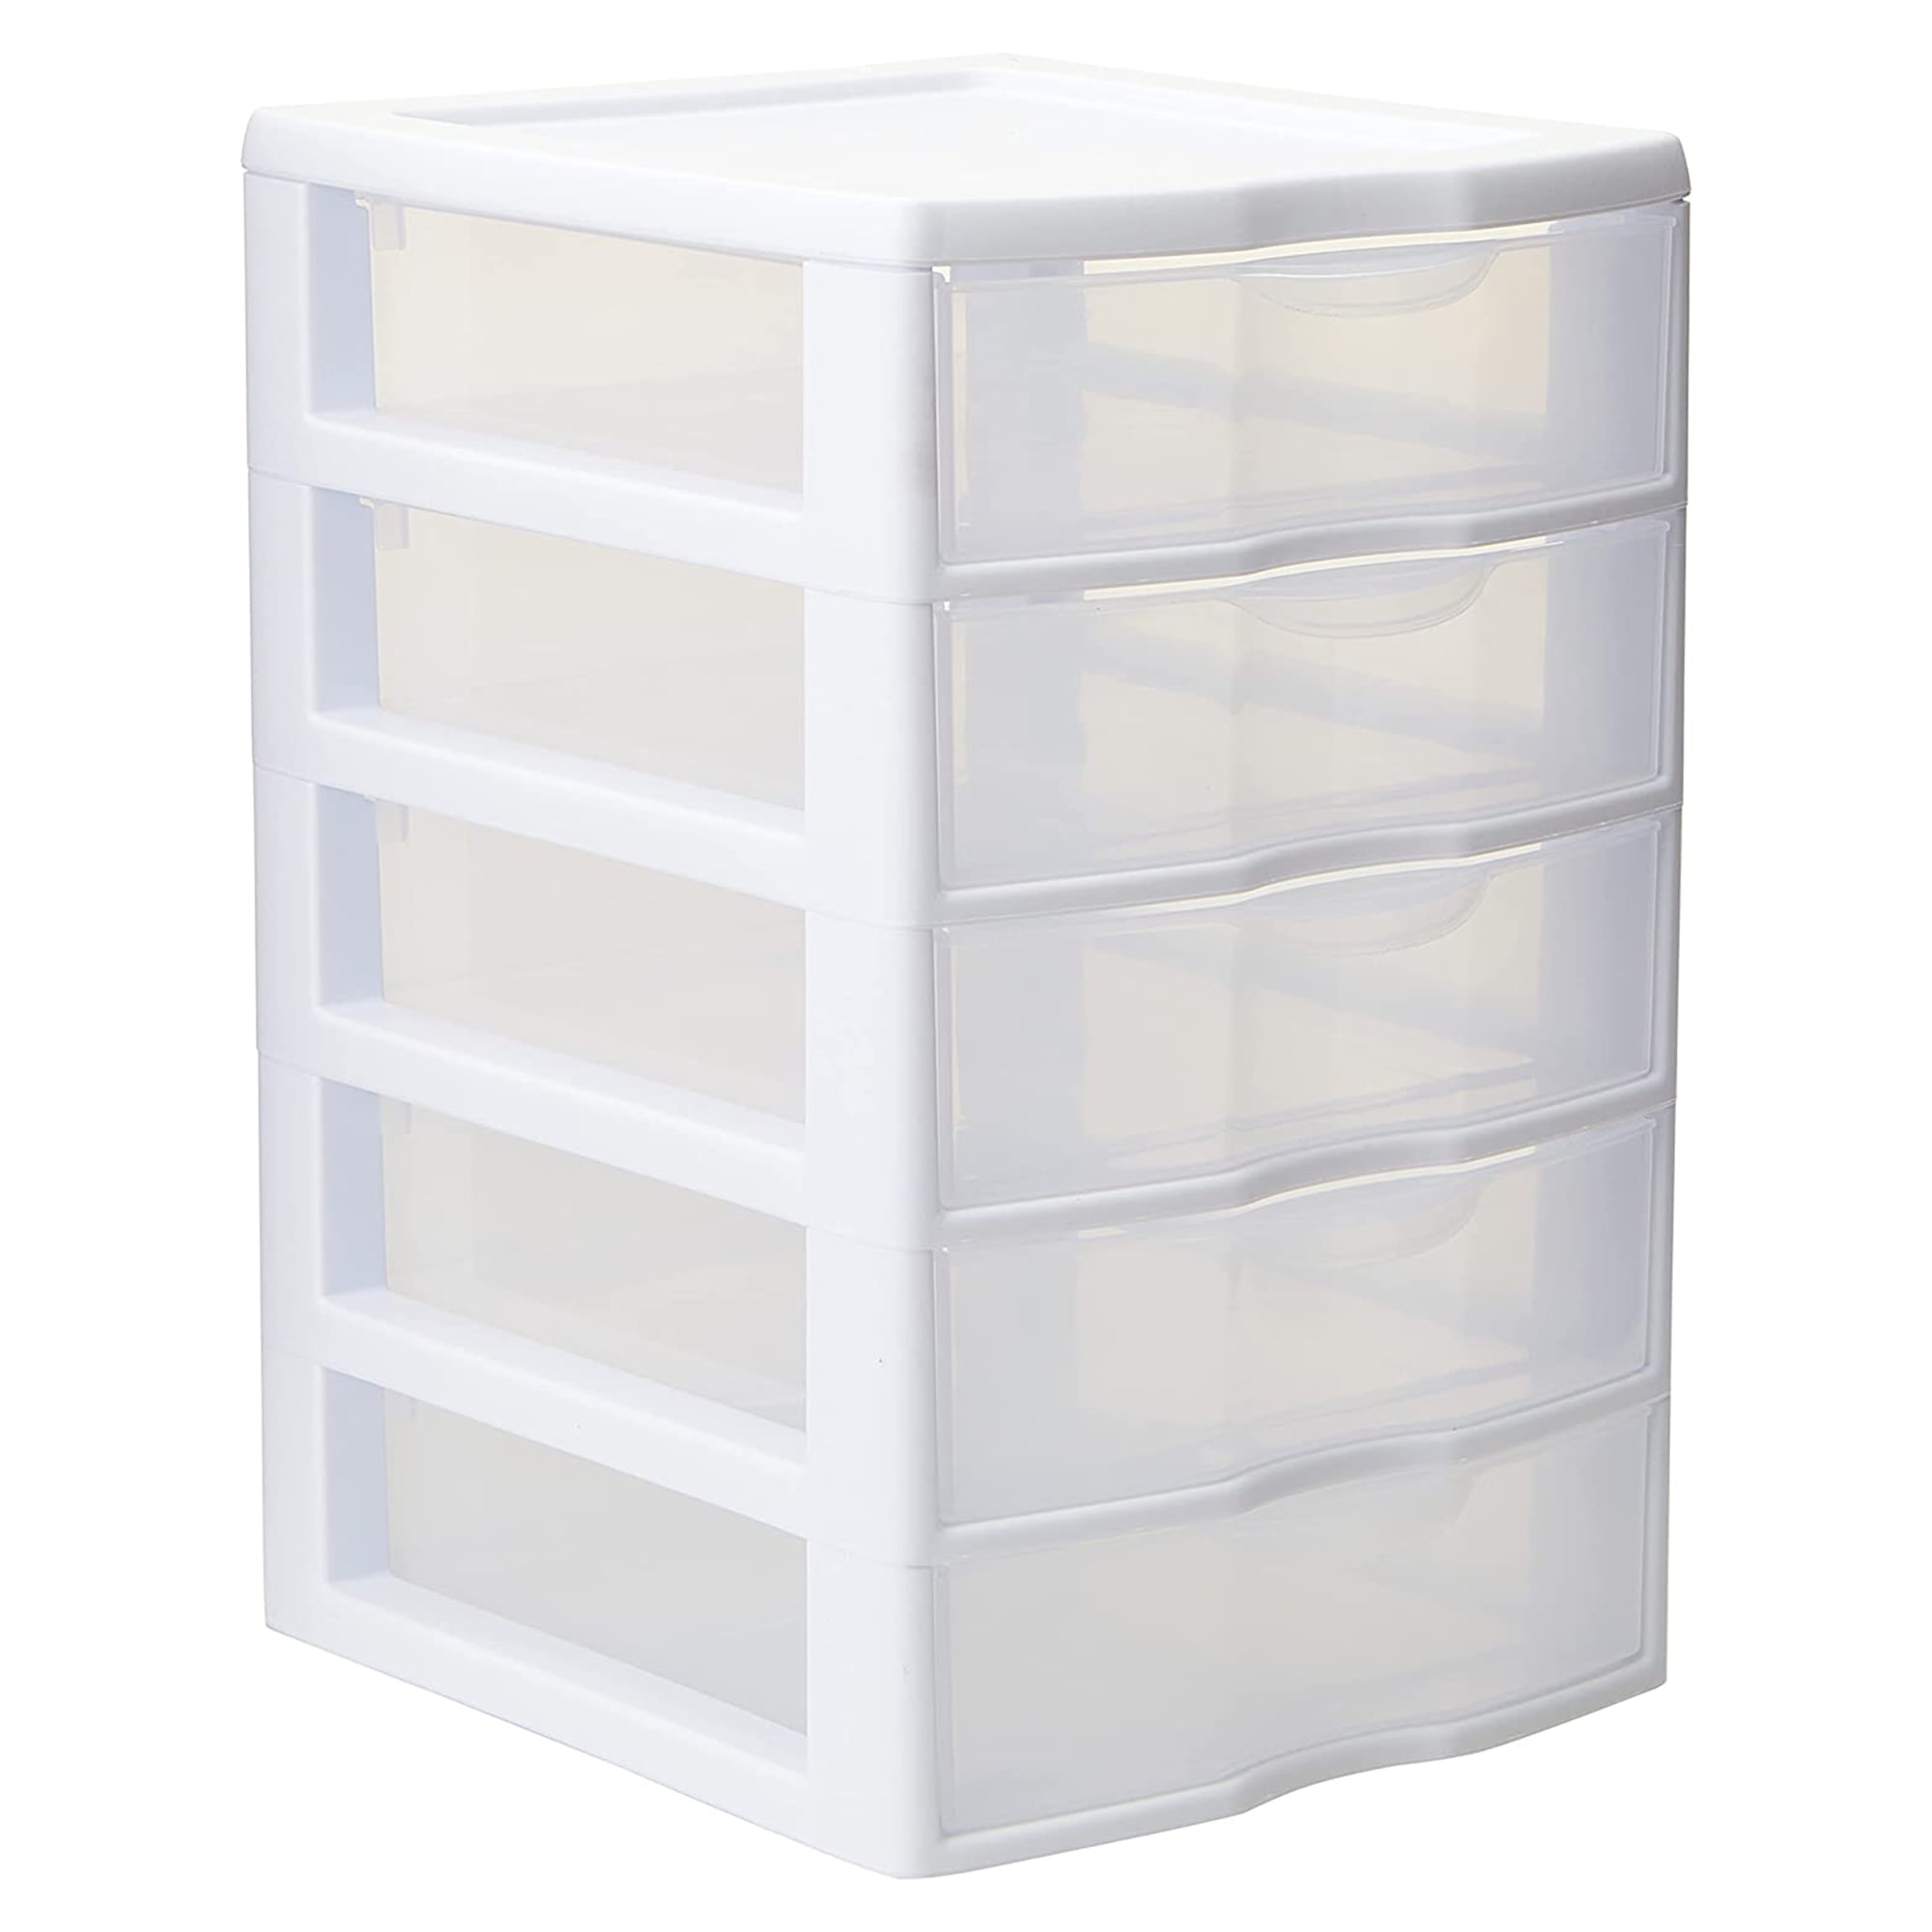 DEAYOU 5 Drawer Desktop Storage Bin Unit, Small Plastic Organizer, White  Frame with Clear Drawer, Mini Container Case for Desk, Storing Craft